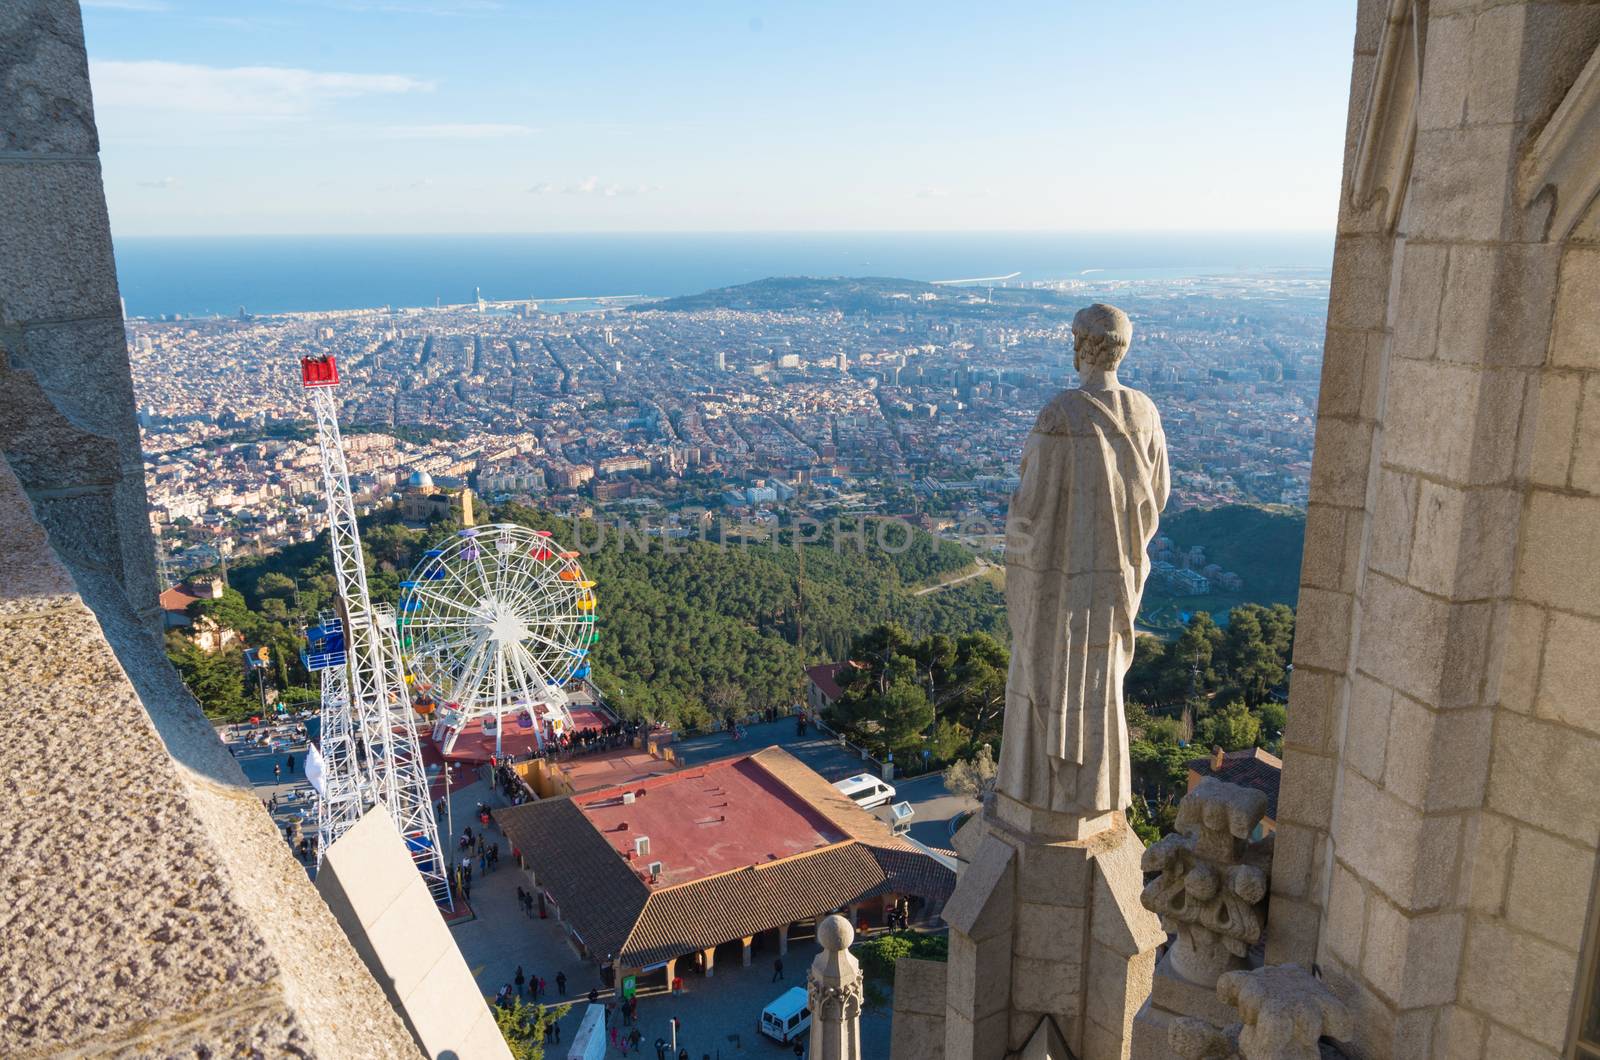 Temple of the Sacred Heart is located on Mount Tibidabo. Designed by the architect Enric Sagnier